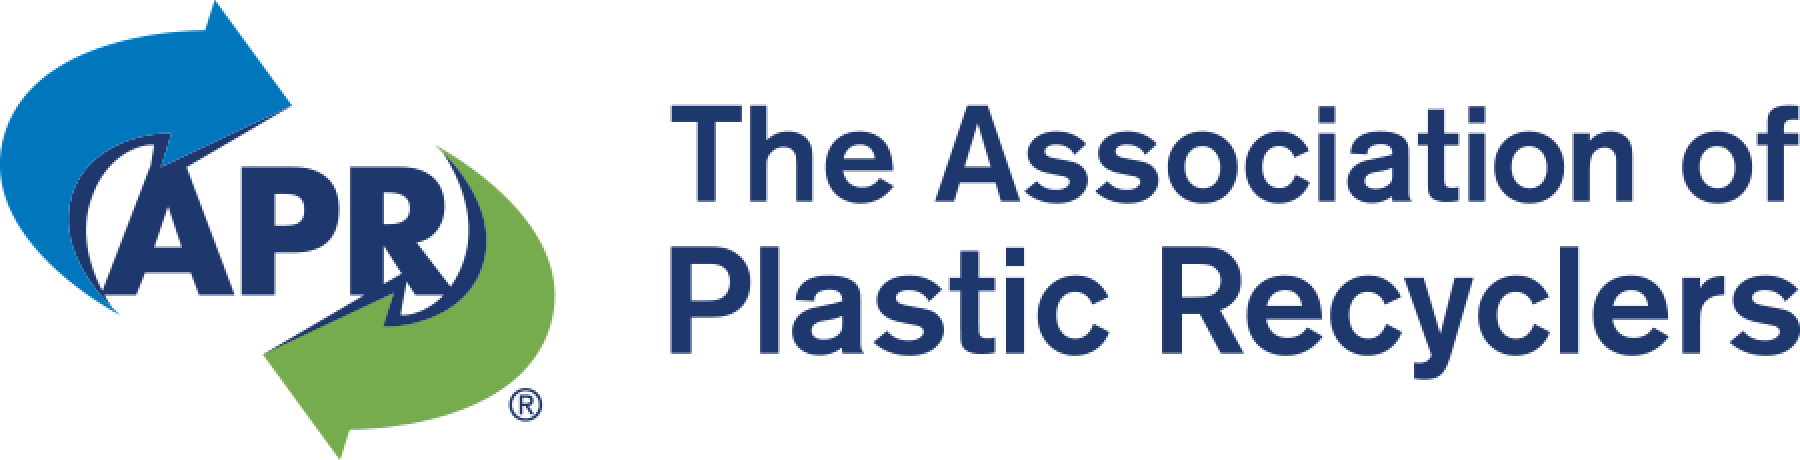 APR, Associated Plastic Recyclers